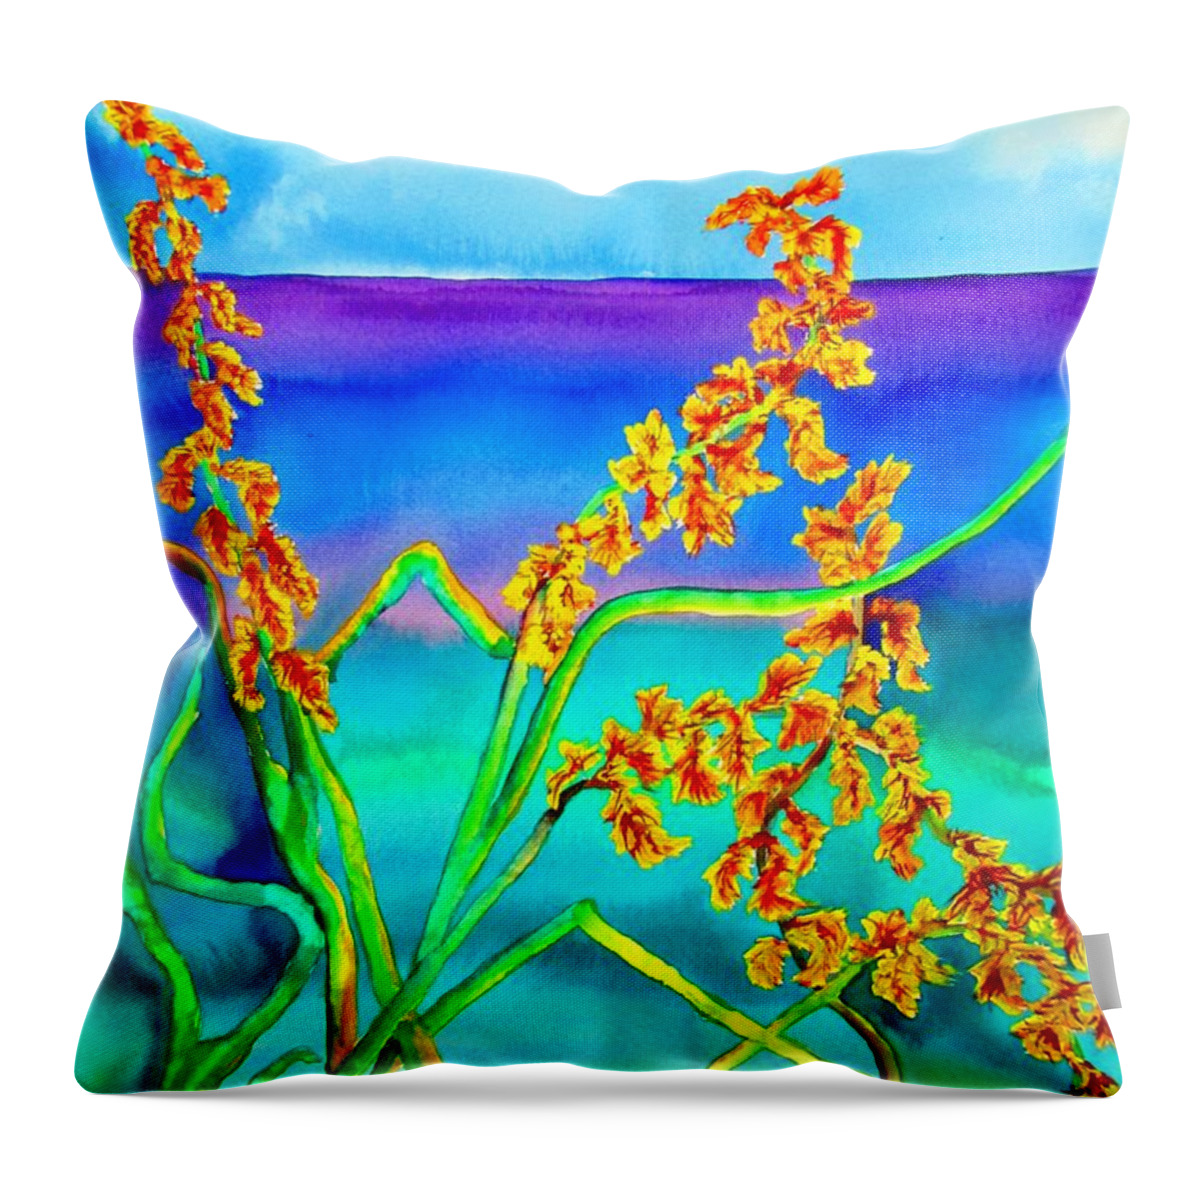 Lil Taylor Throw Pillow featuring the painting Luminous Oats by Lil Taylor